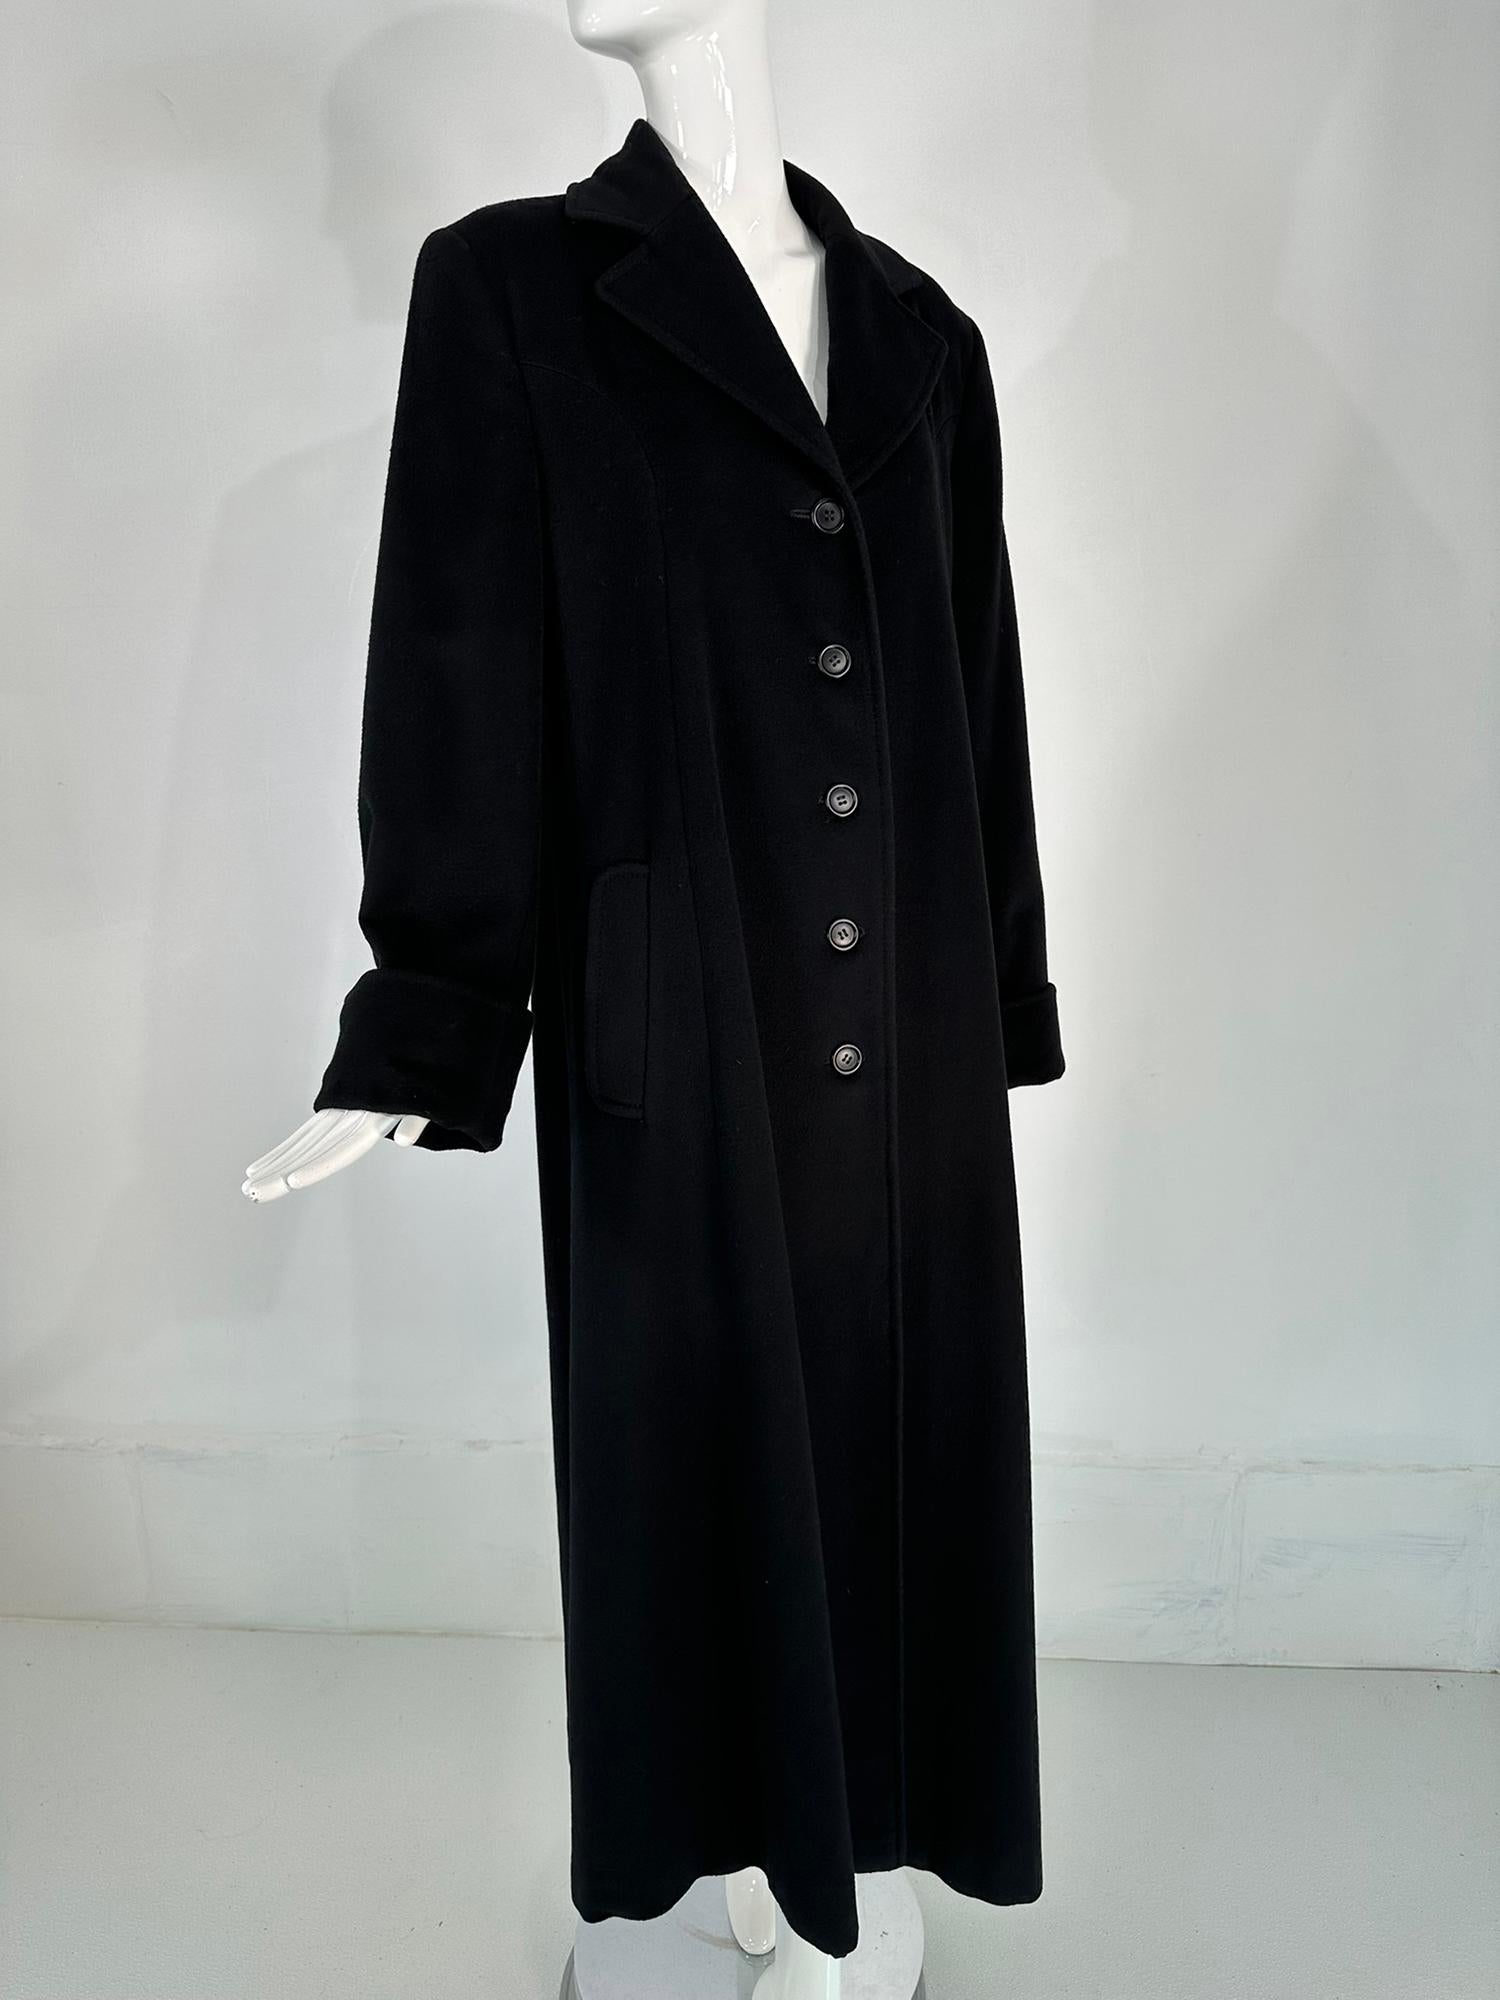 Bergdorf Goodman black cashmere overcoat from the 1990s. A statement making coat in luxurious black cashmere. Single breasted coat has notched lapels, the long sleeves have deep turn back cuffs. There are angled flap hip pockets. The coat back has